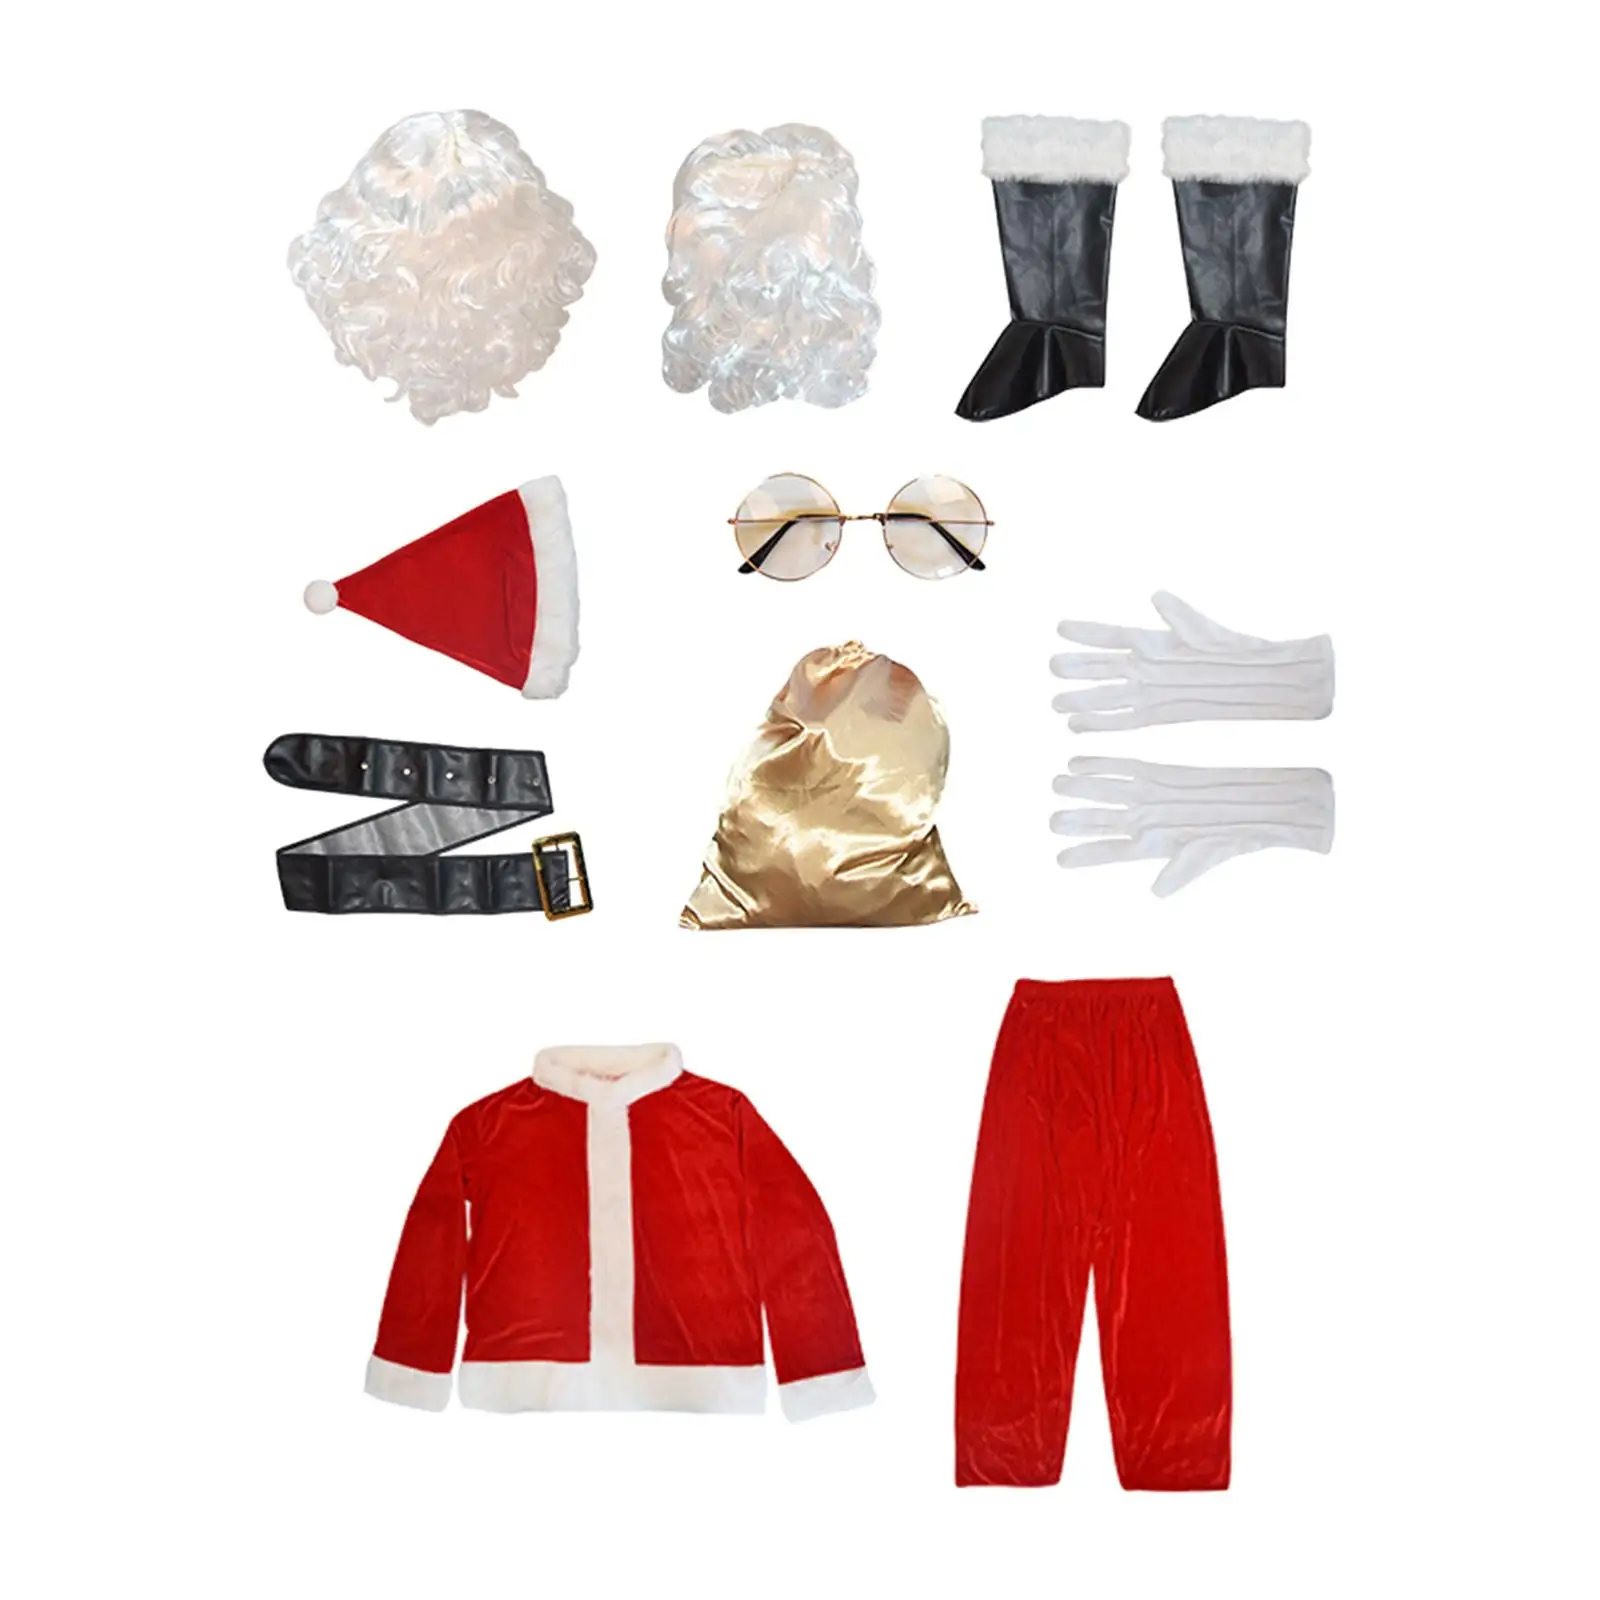 10Pcs Santa Costume for Men, Christmas Clause Outfit Wig Beard Velvet for Clothing Accessory, Holidays